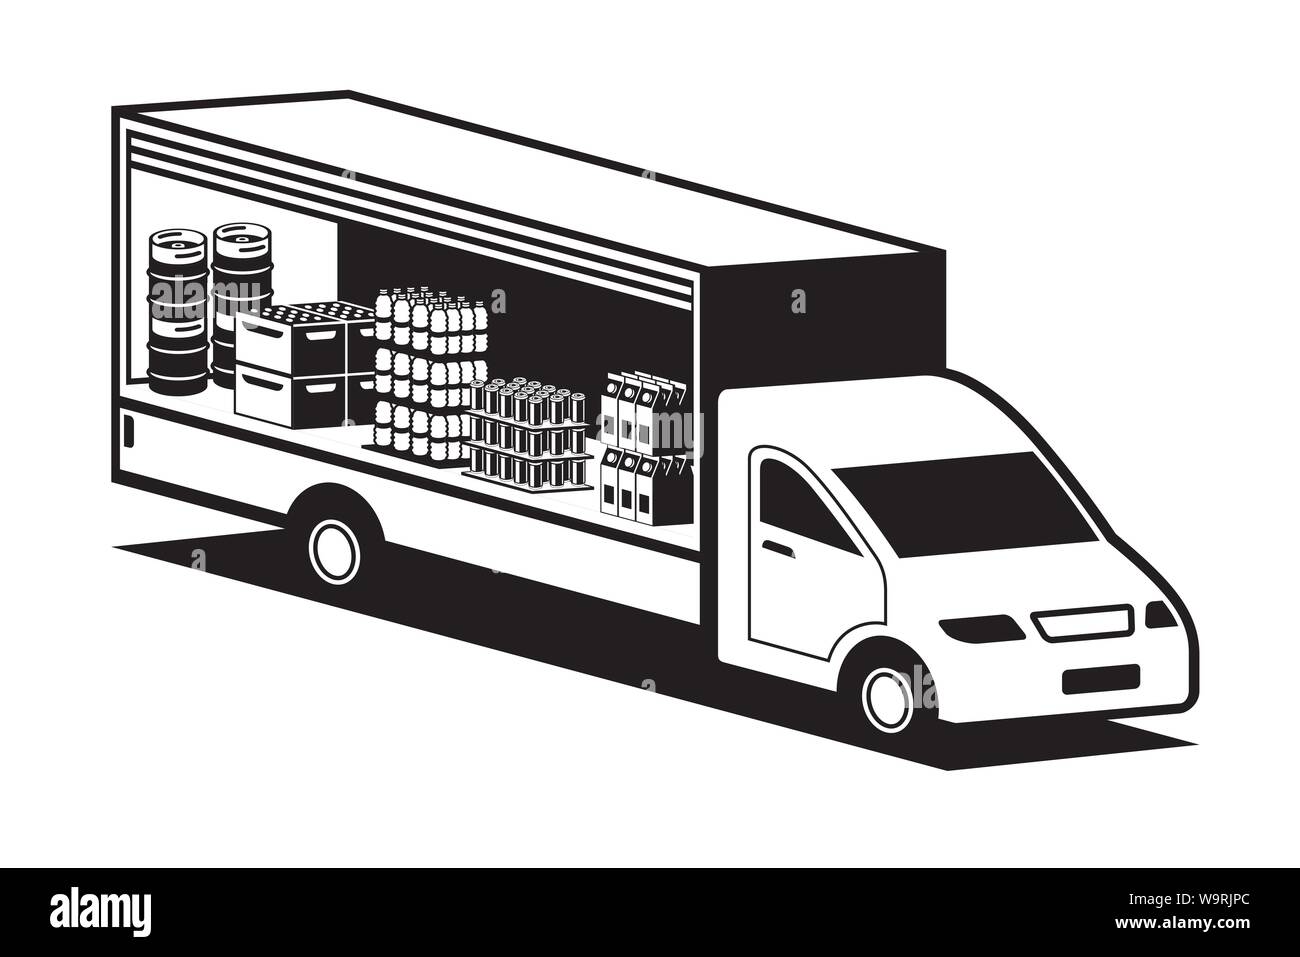 Cargo van carrying carbonated and alcoholic drinks - vector illustration Stock Vector